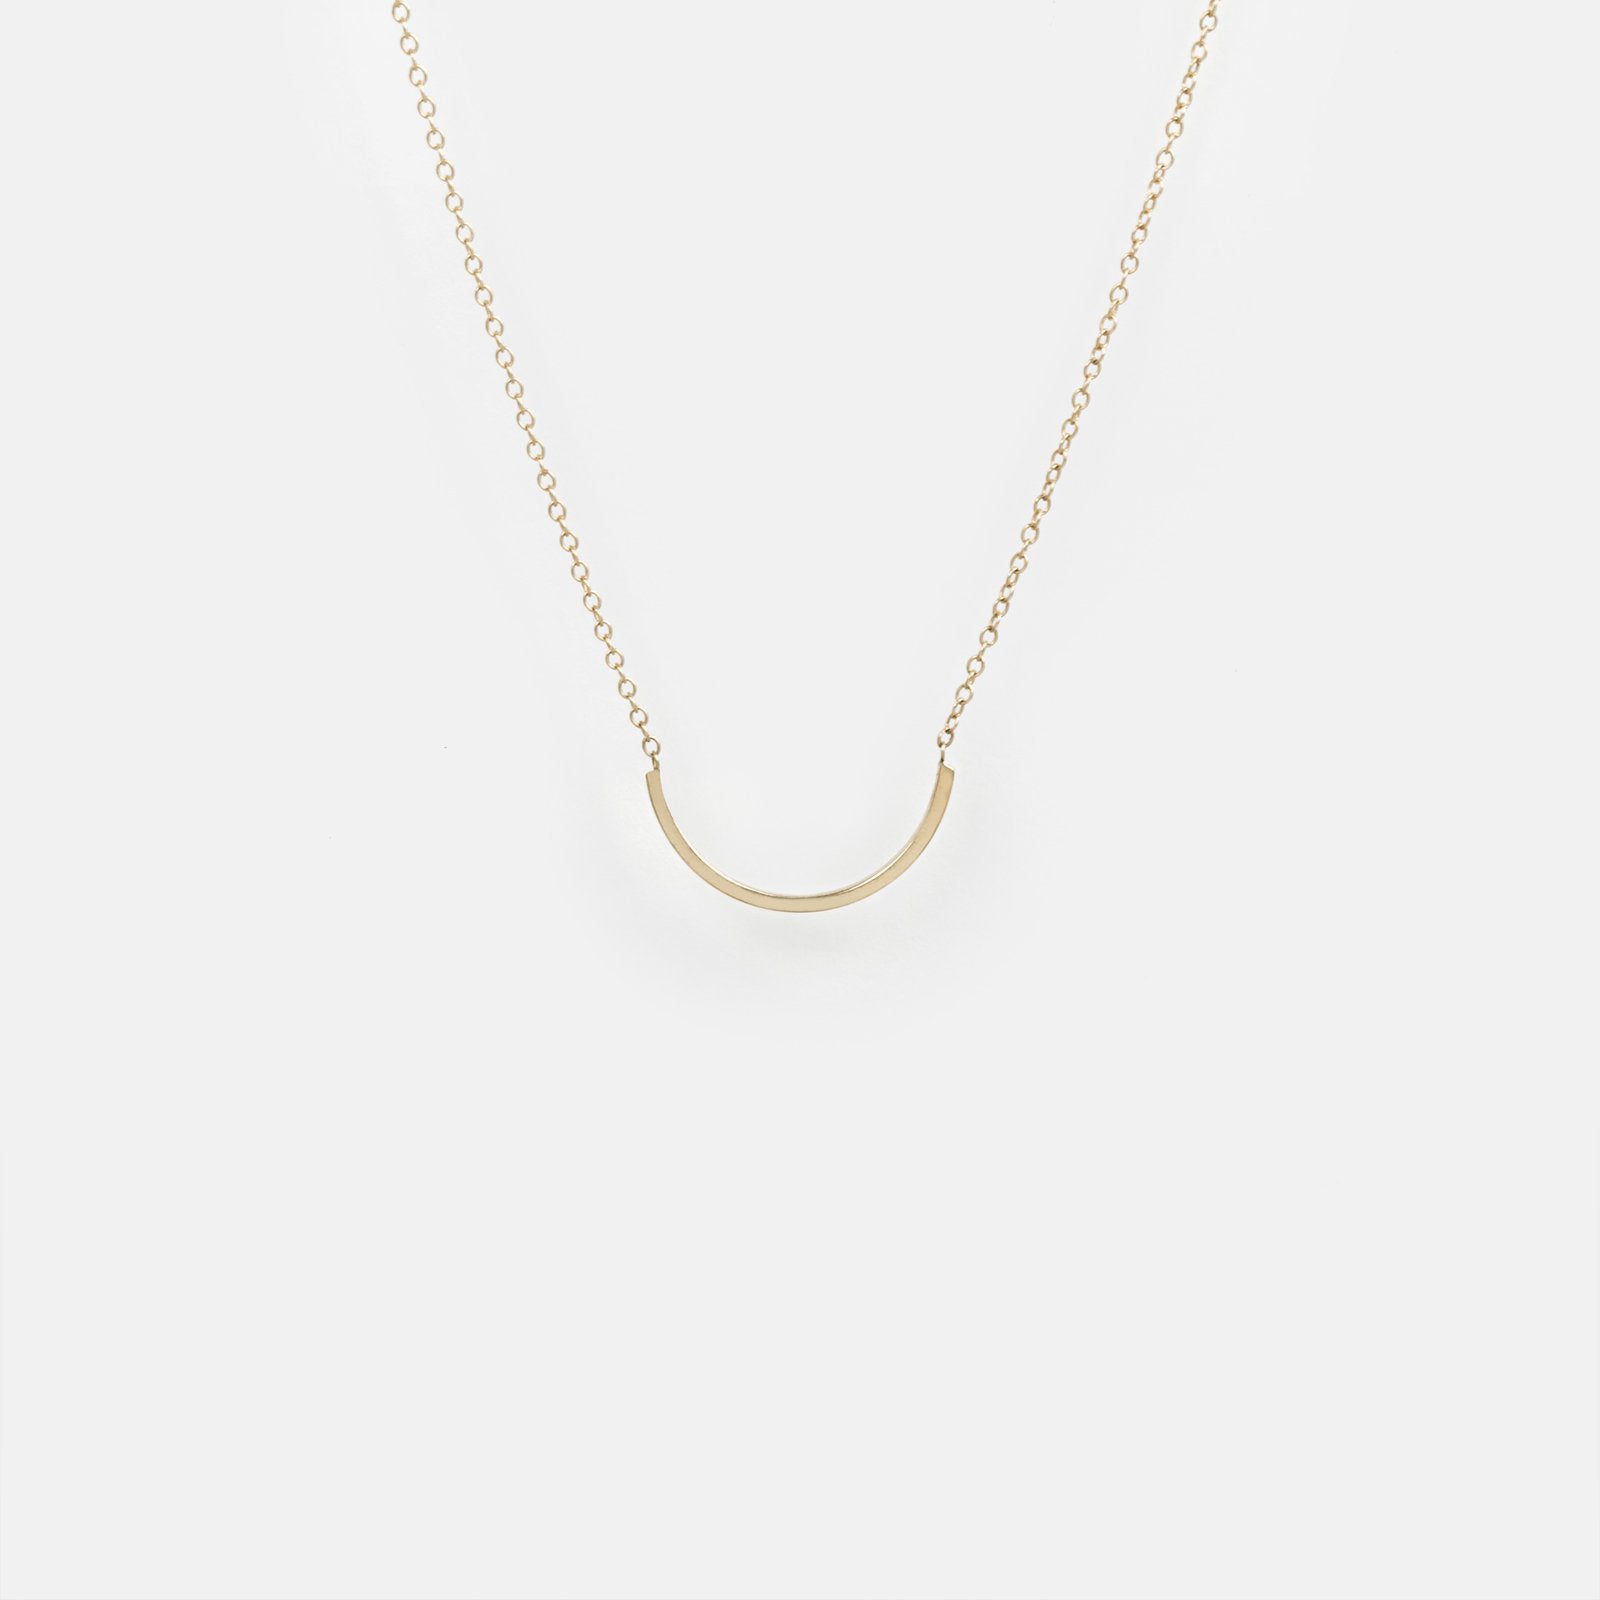 Uva Minimal Necklace in 14k Gold By SHW Fine Jewelry New York City